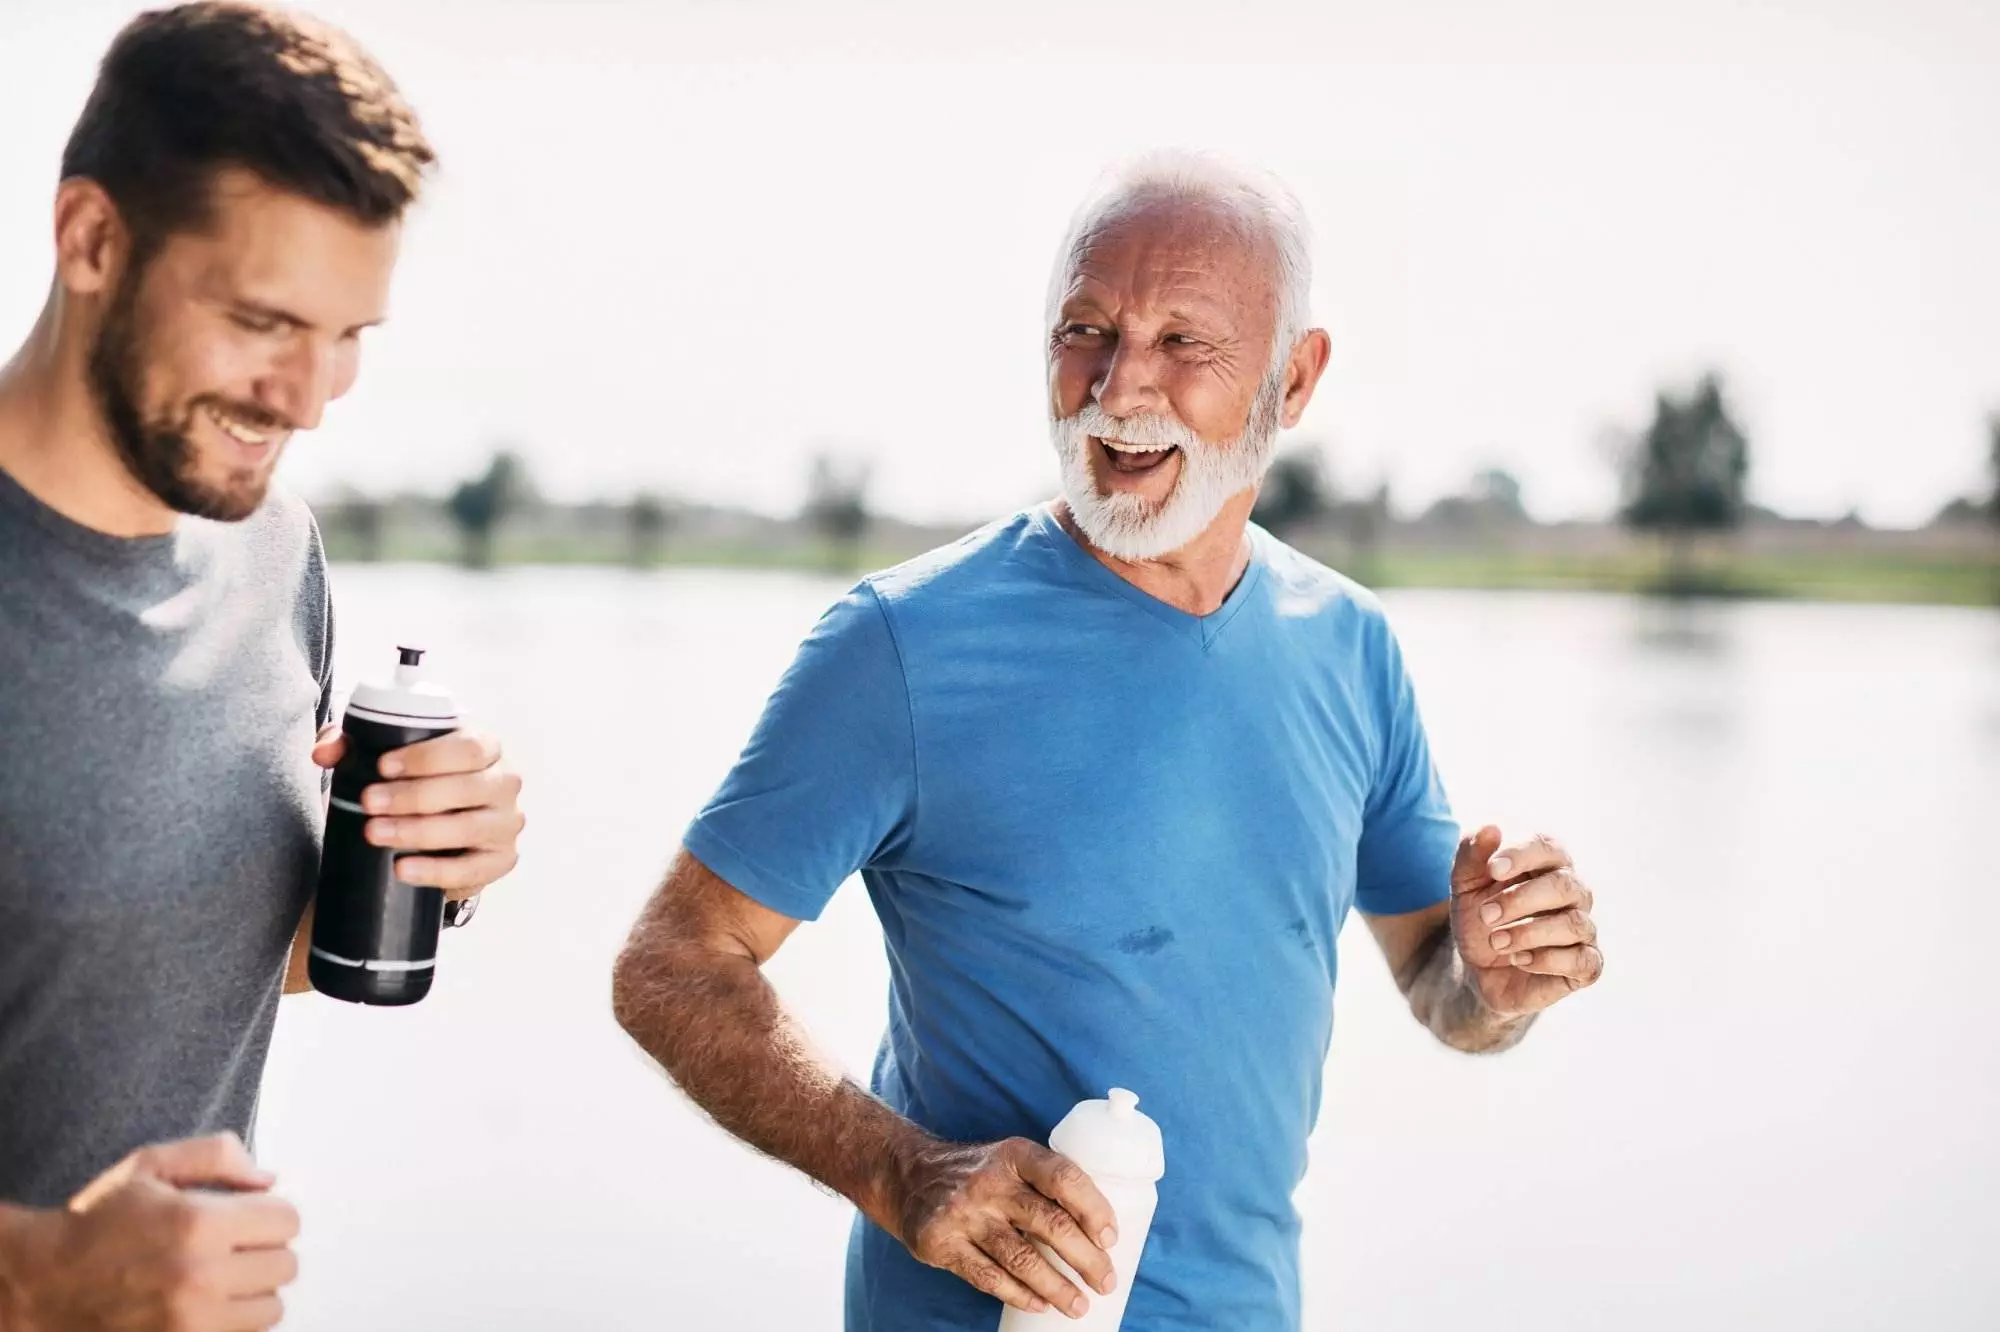 Two men jogging and smiling outdoors.